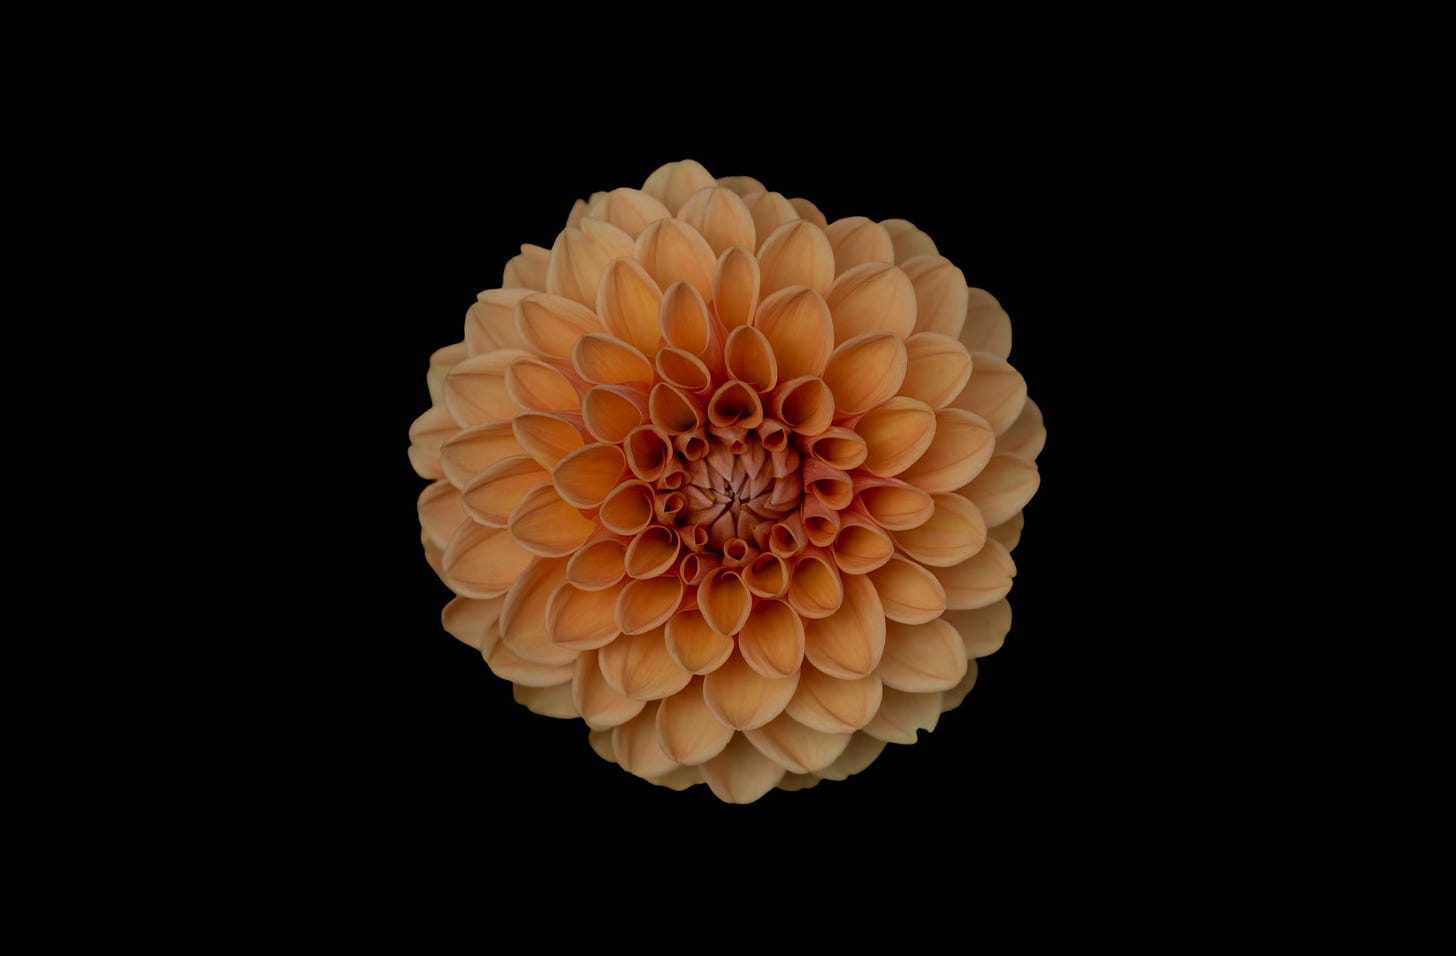 image of an orange flower for article on perfection by Larry G. Maguire